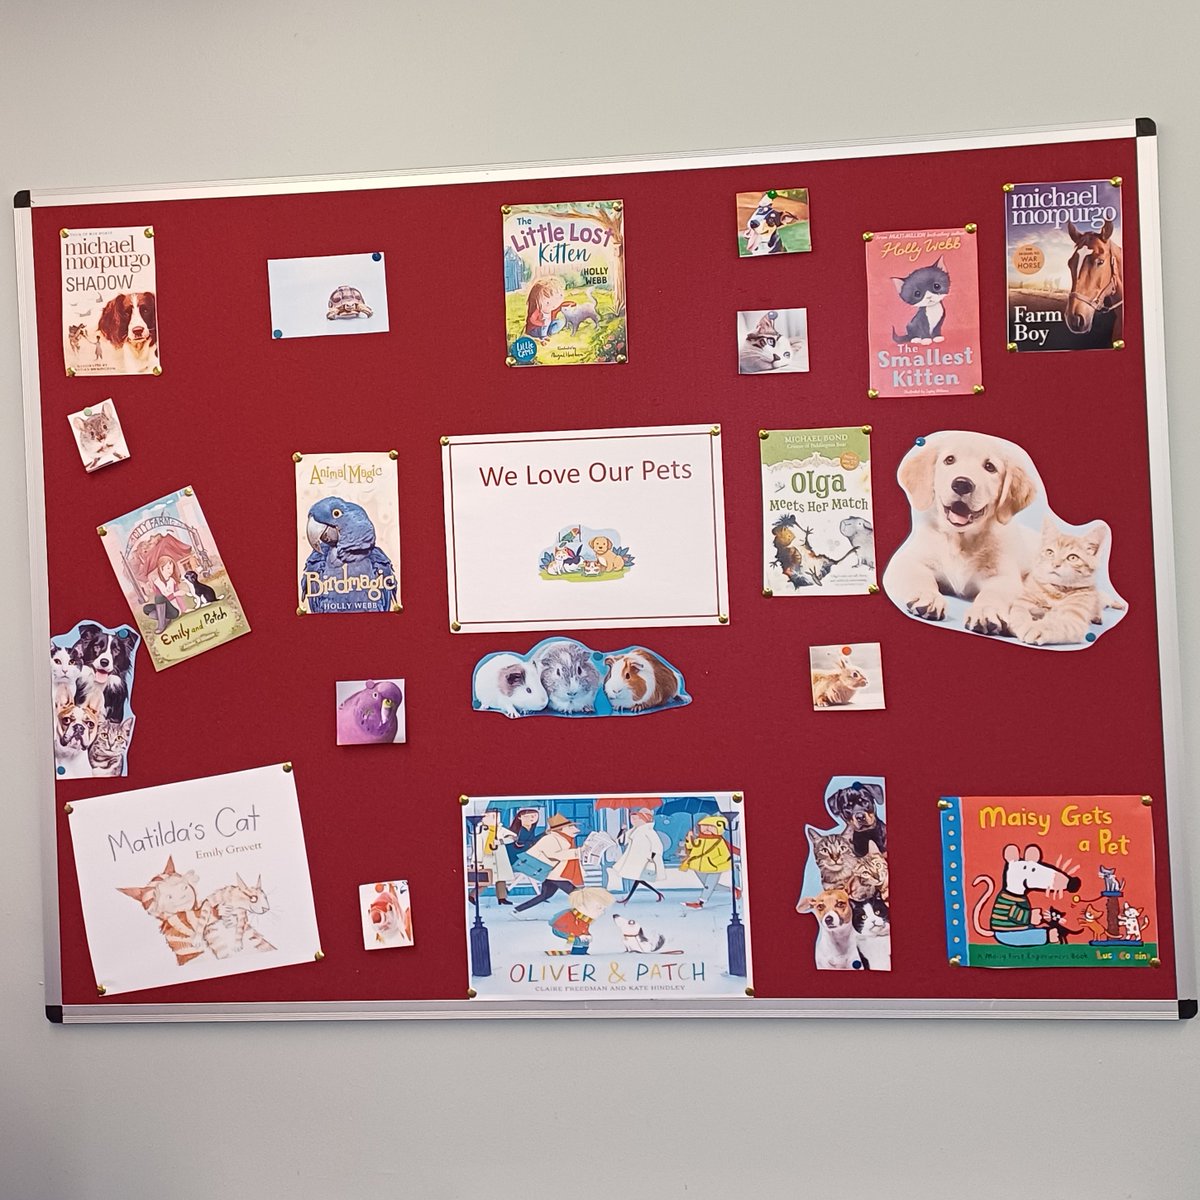 We're soon saying goodbye to National Pet Month, so here's a lovely little display from Murton Library, and a reminder to give your furry, scaly or feathered friends all the love they deserve! 🐶🐱🐰🐹 #NationalPetMonth